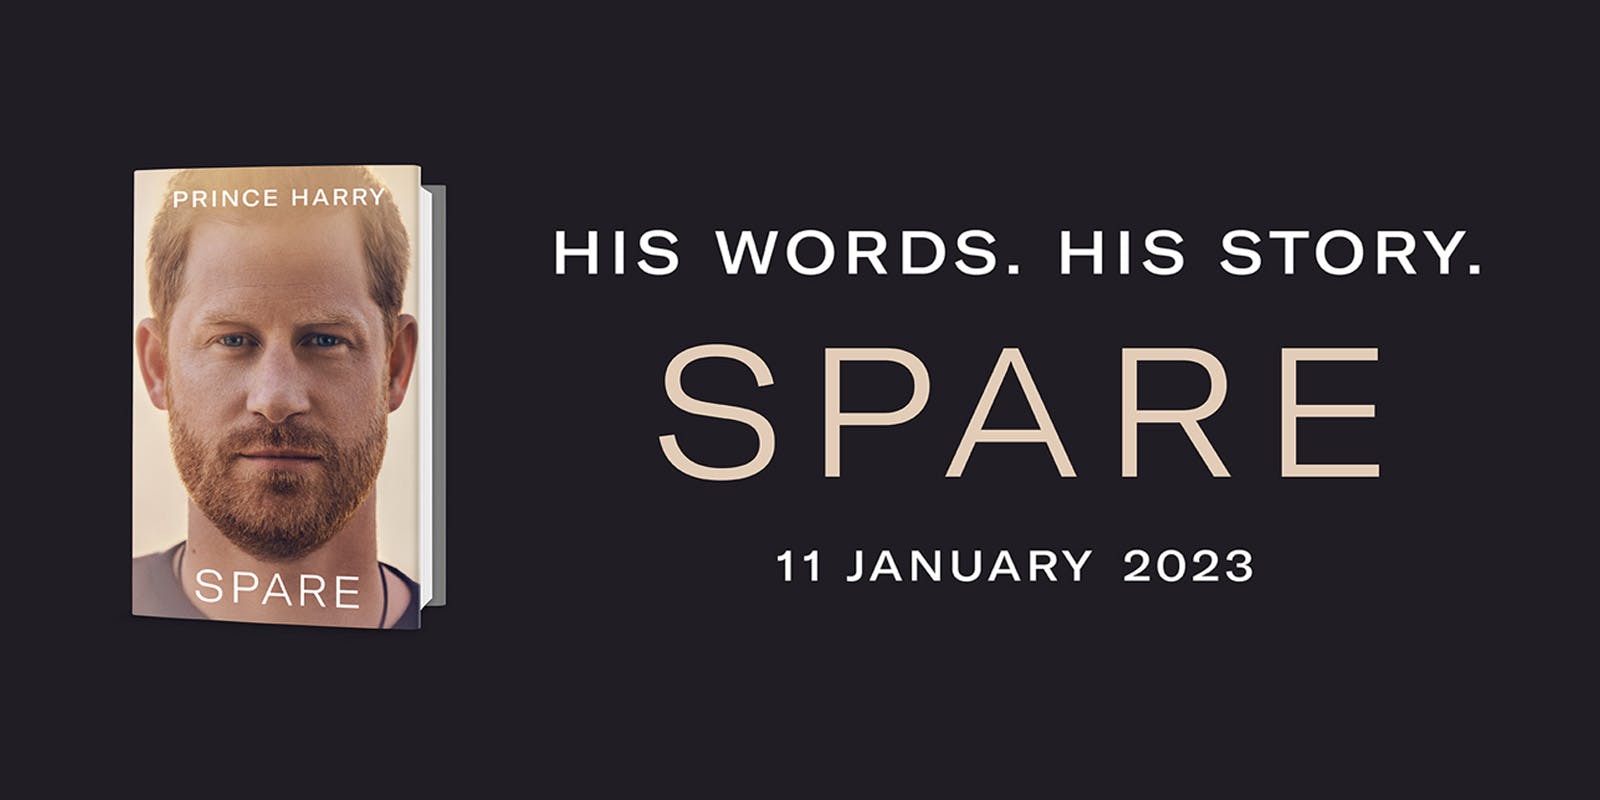 SPARE, the memoir from Prince Harry, The Duke of Sussex, to be released on January 11